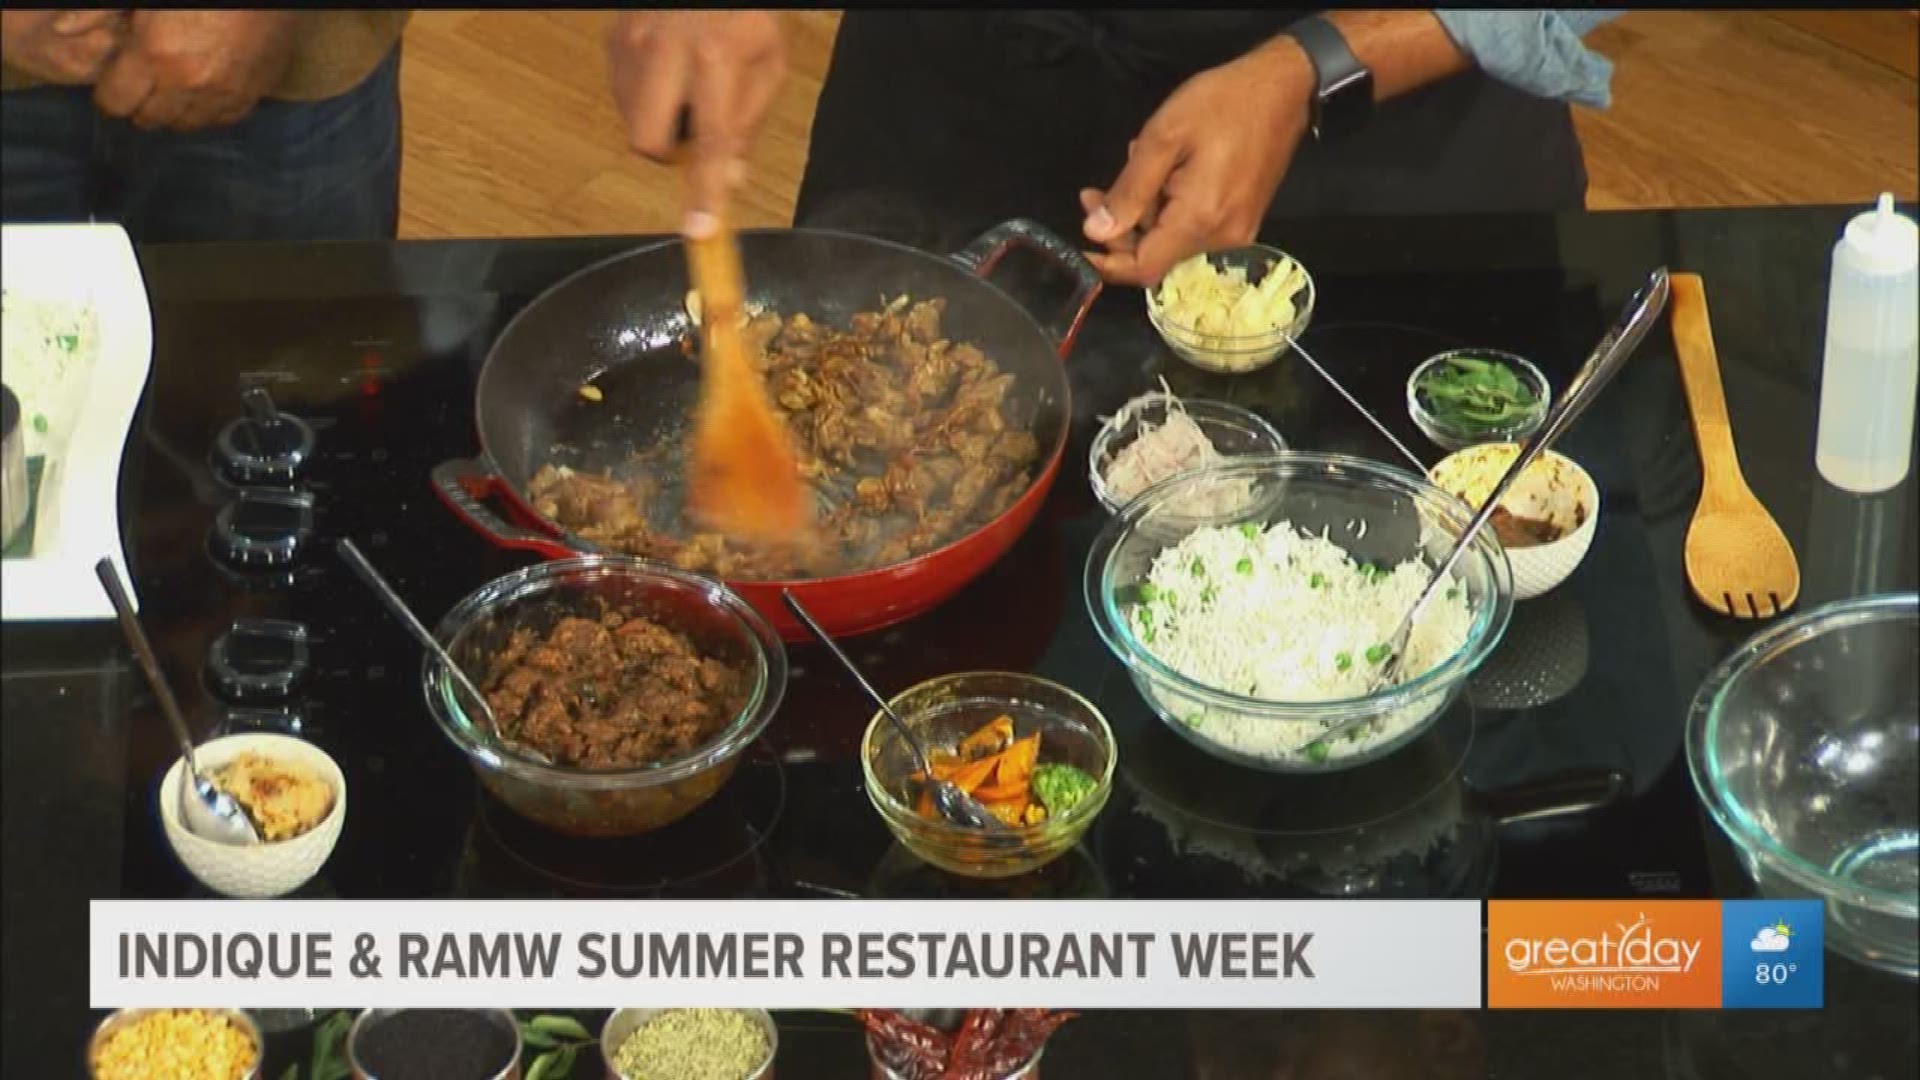 Rahul Vinod, Consulting Chef and Surfy Rahman, Co-Owner of Indique share their special Argentine beef dish available during the Restaurant Association Metropolitan Washington’s Summer Restaurant Week.